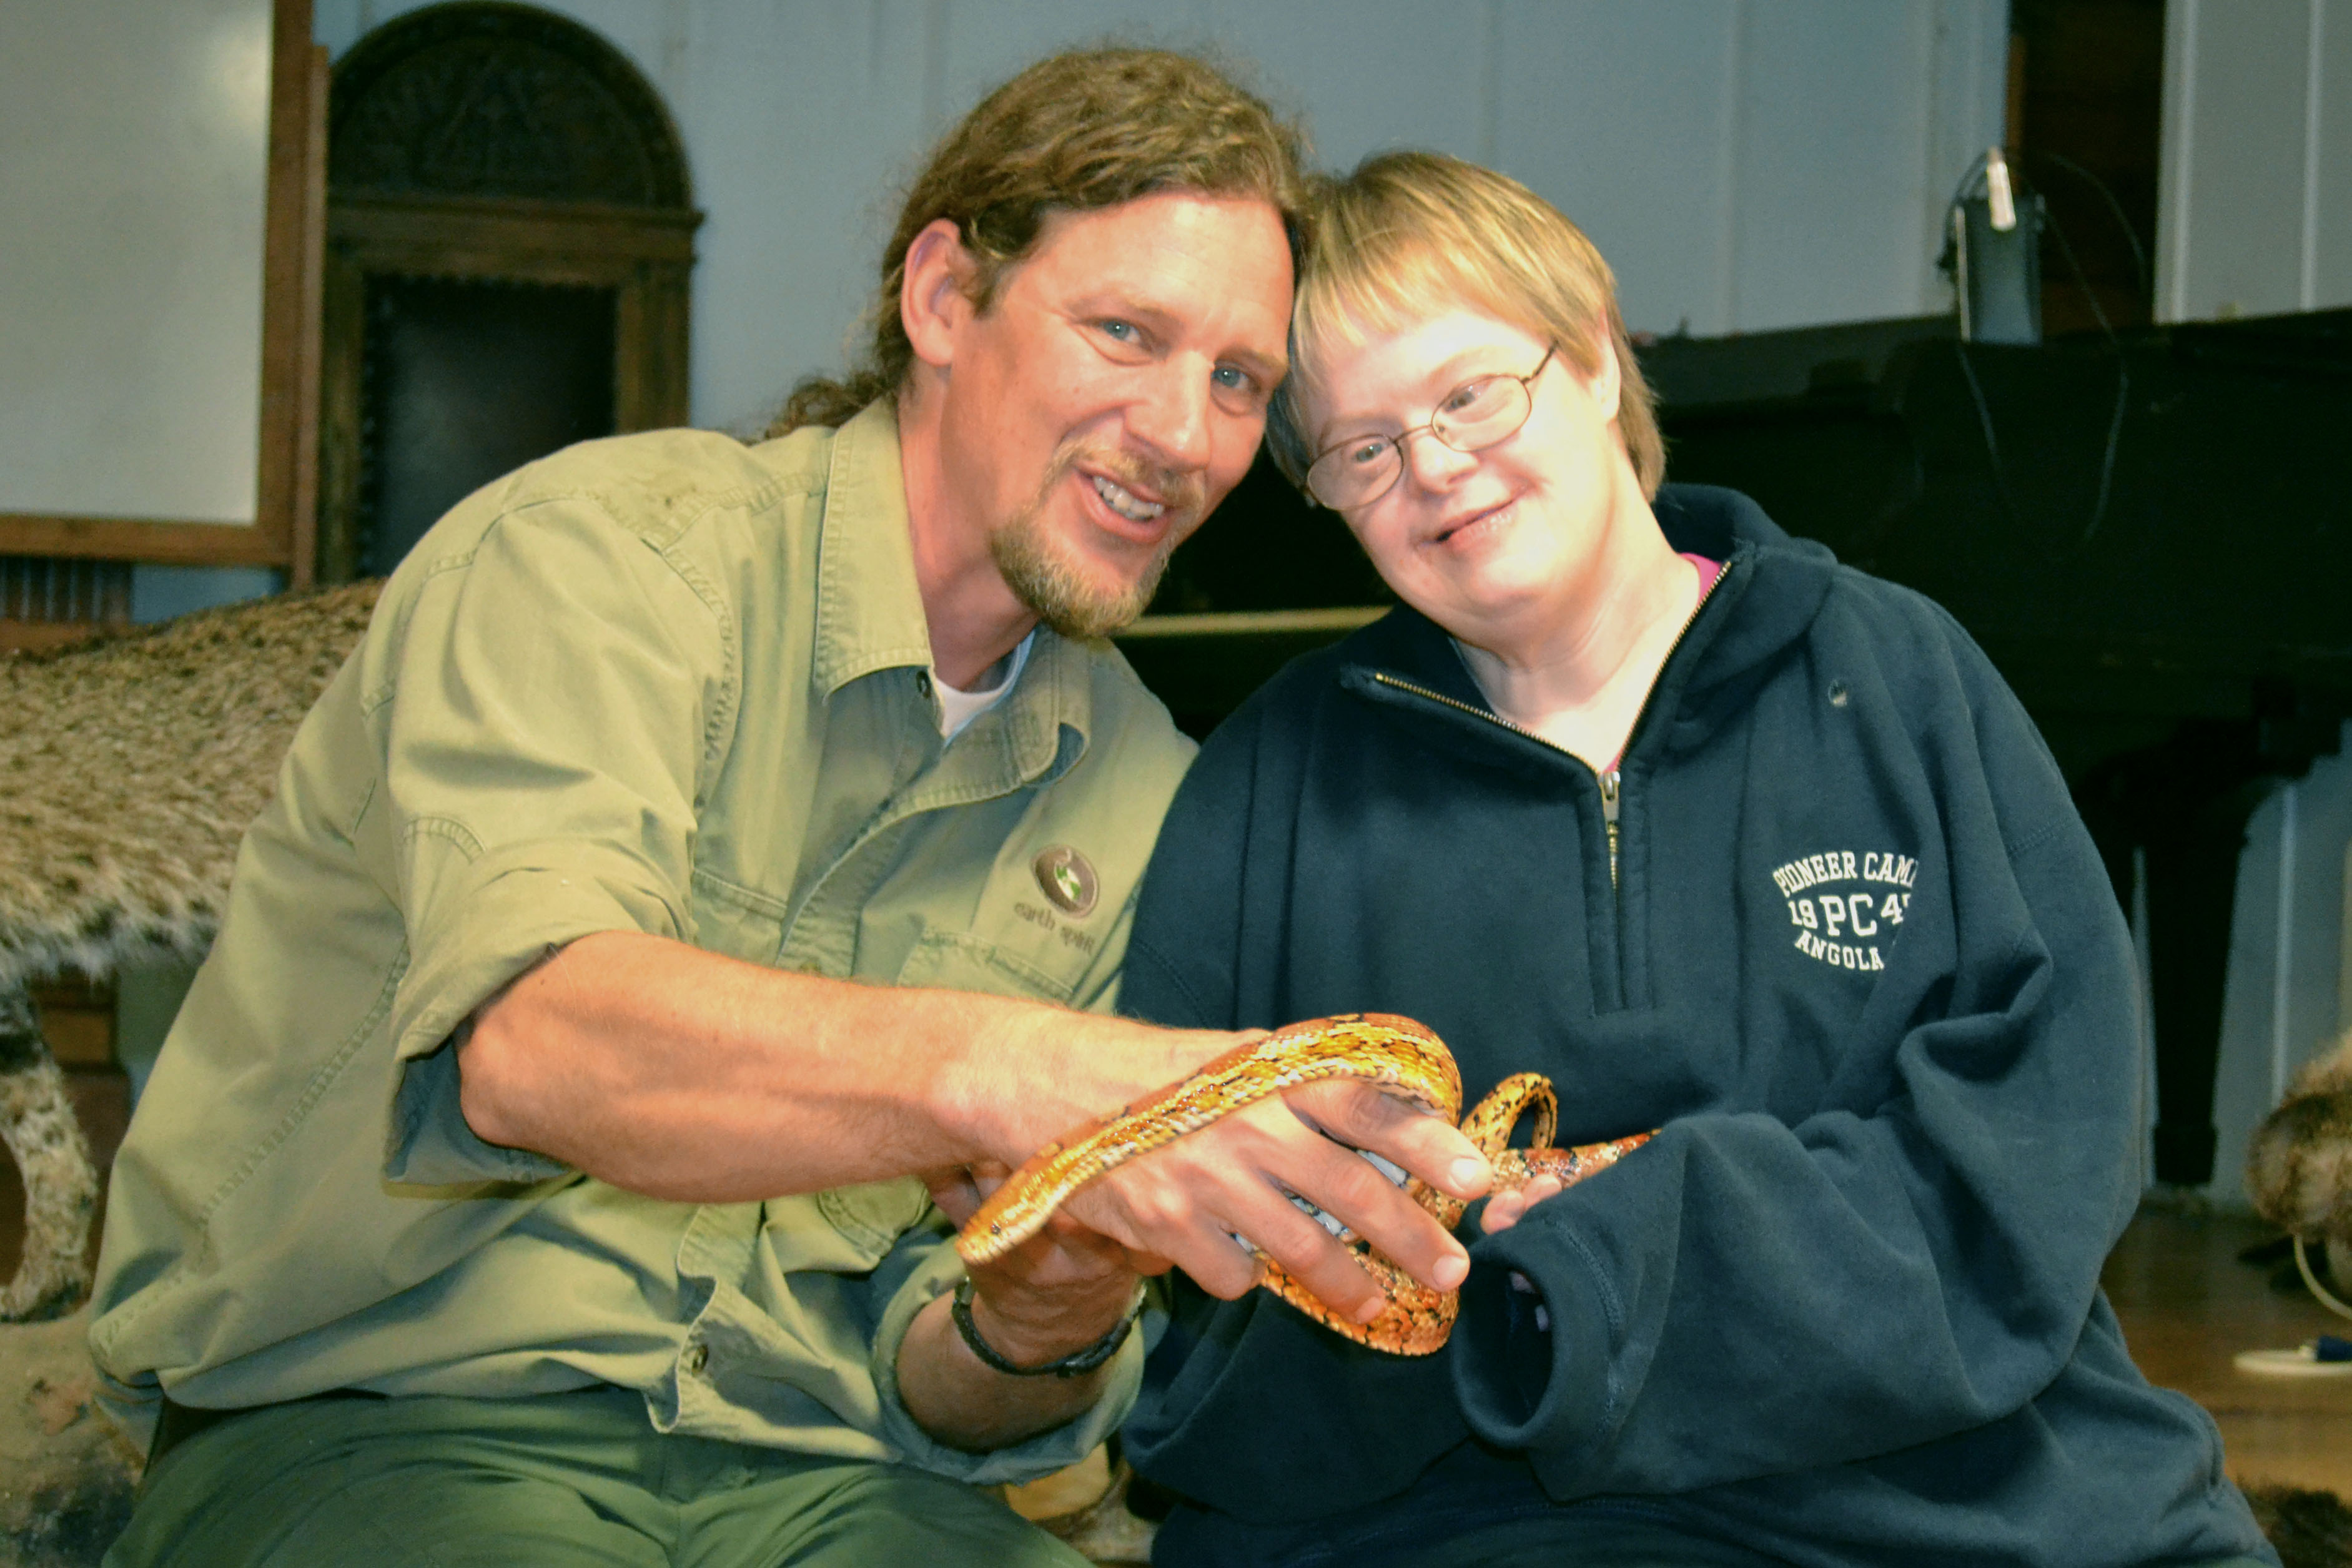 EarthSpirit staff showing vacationer a snake at People and Places’ Annual Fall Getaway.